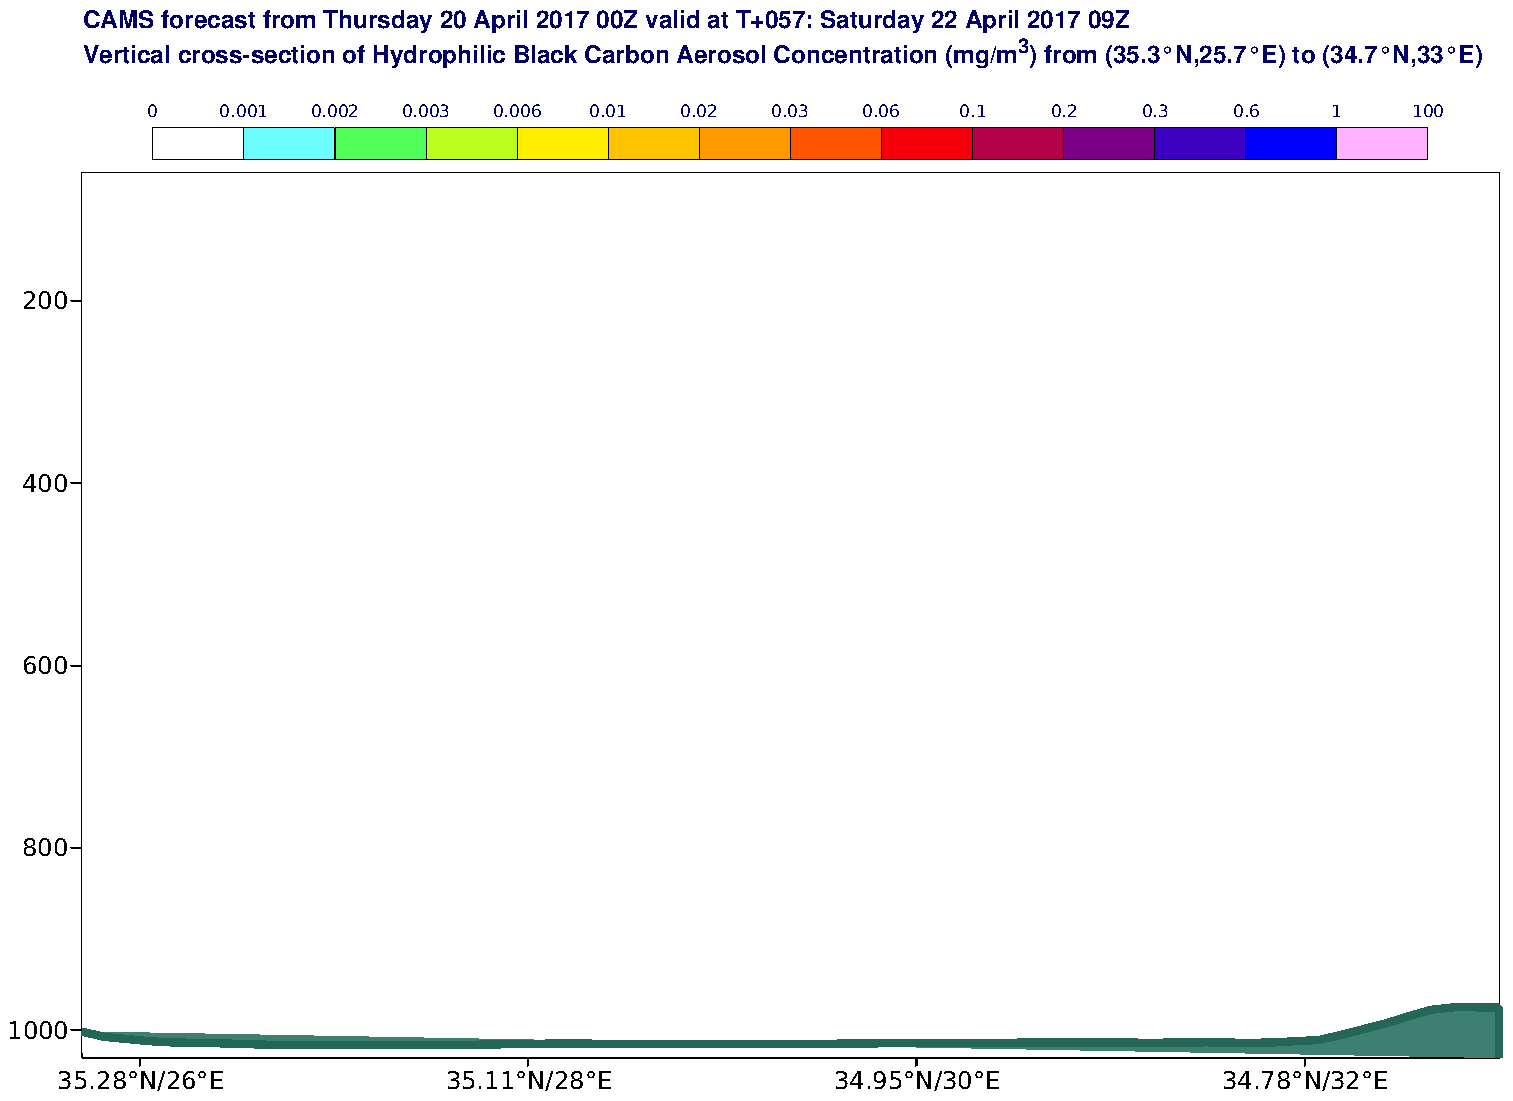 Vertical cross-section of Hydrophilic Black Carbon Aerosol Concentration (mg/m3) valid at T57 - 2017-04-22 09:00